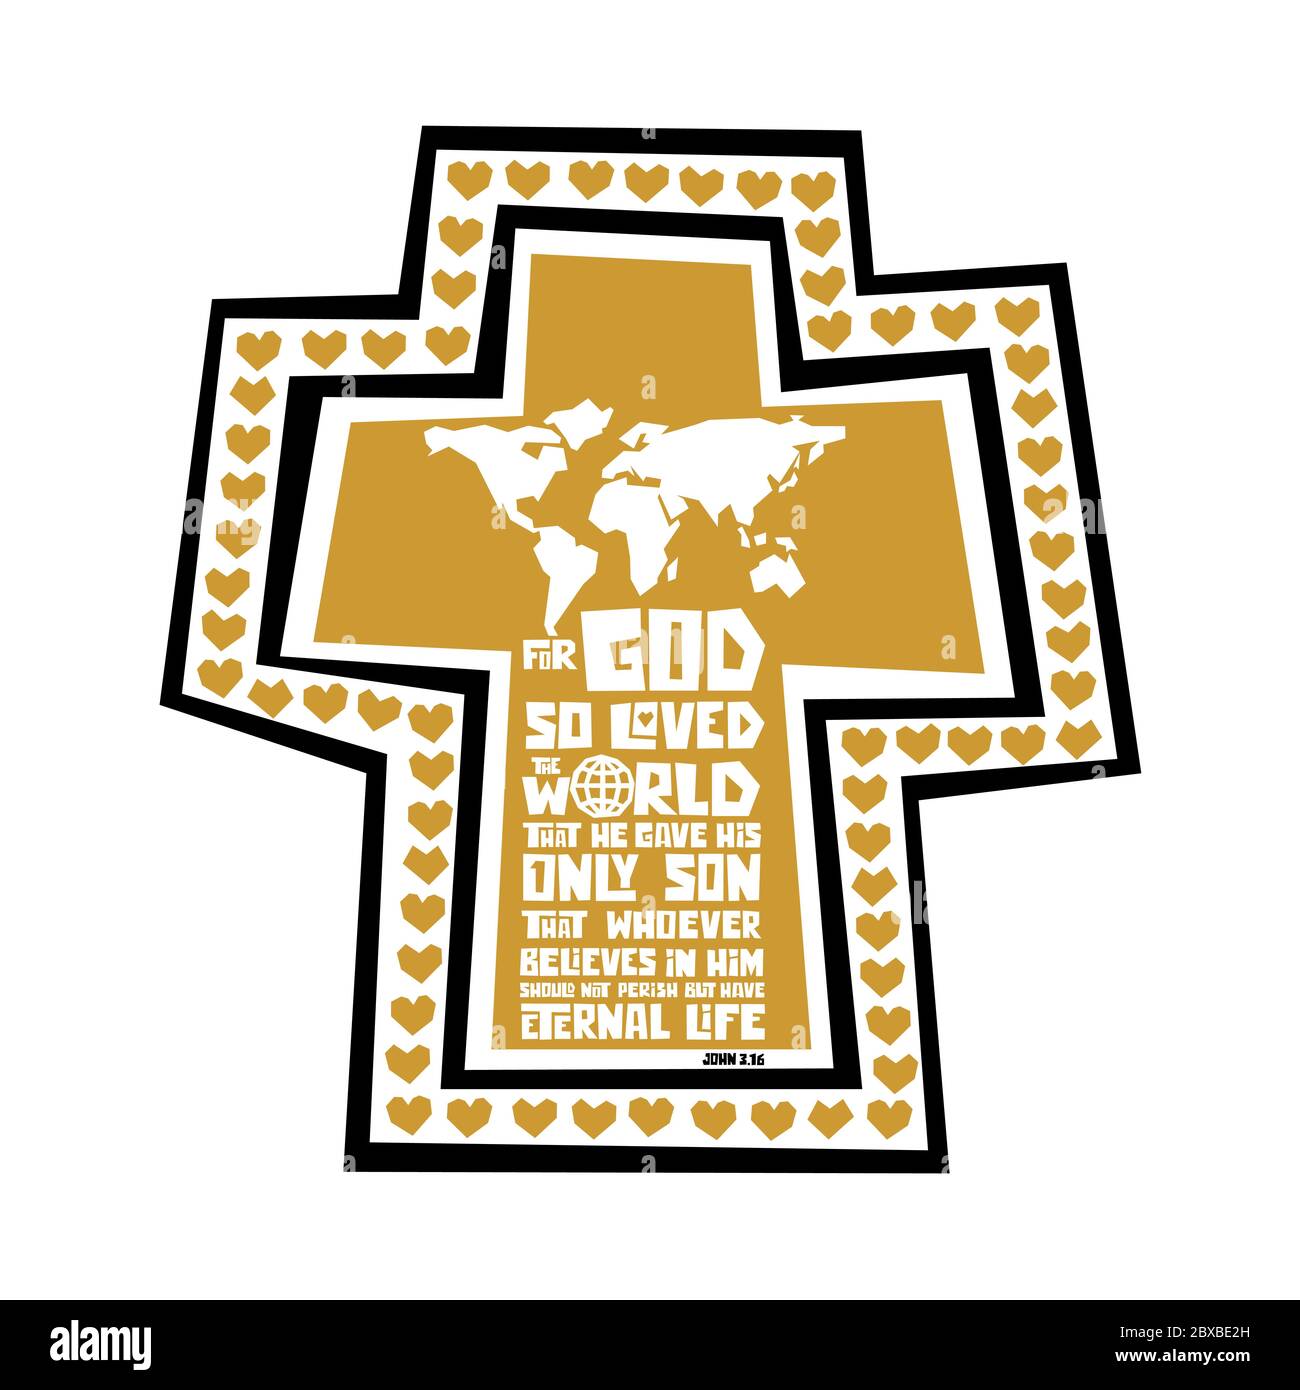 Christian typography, lettering and biblical illustration. For God so loved the world that he gave his only Son. Stock Vector